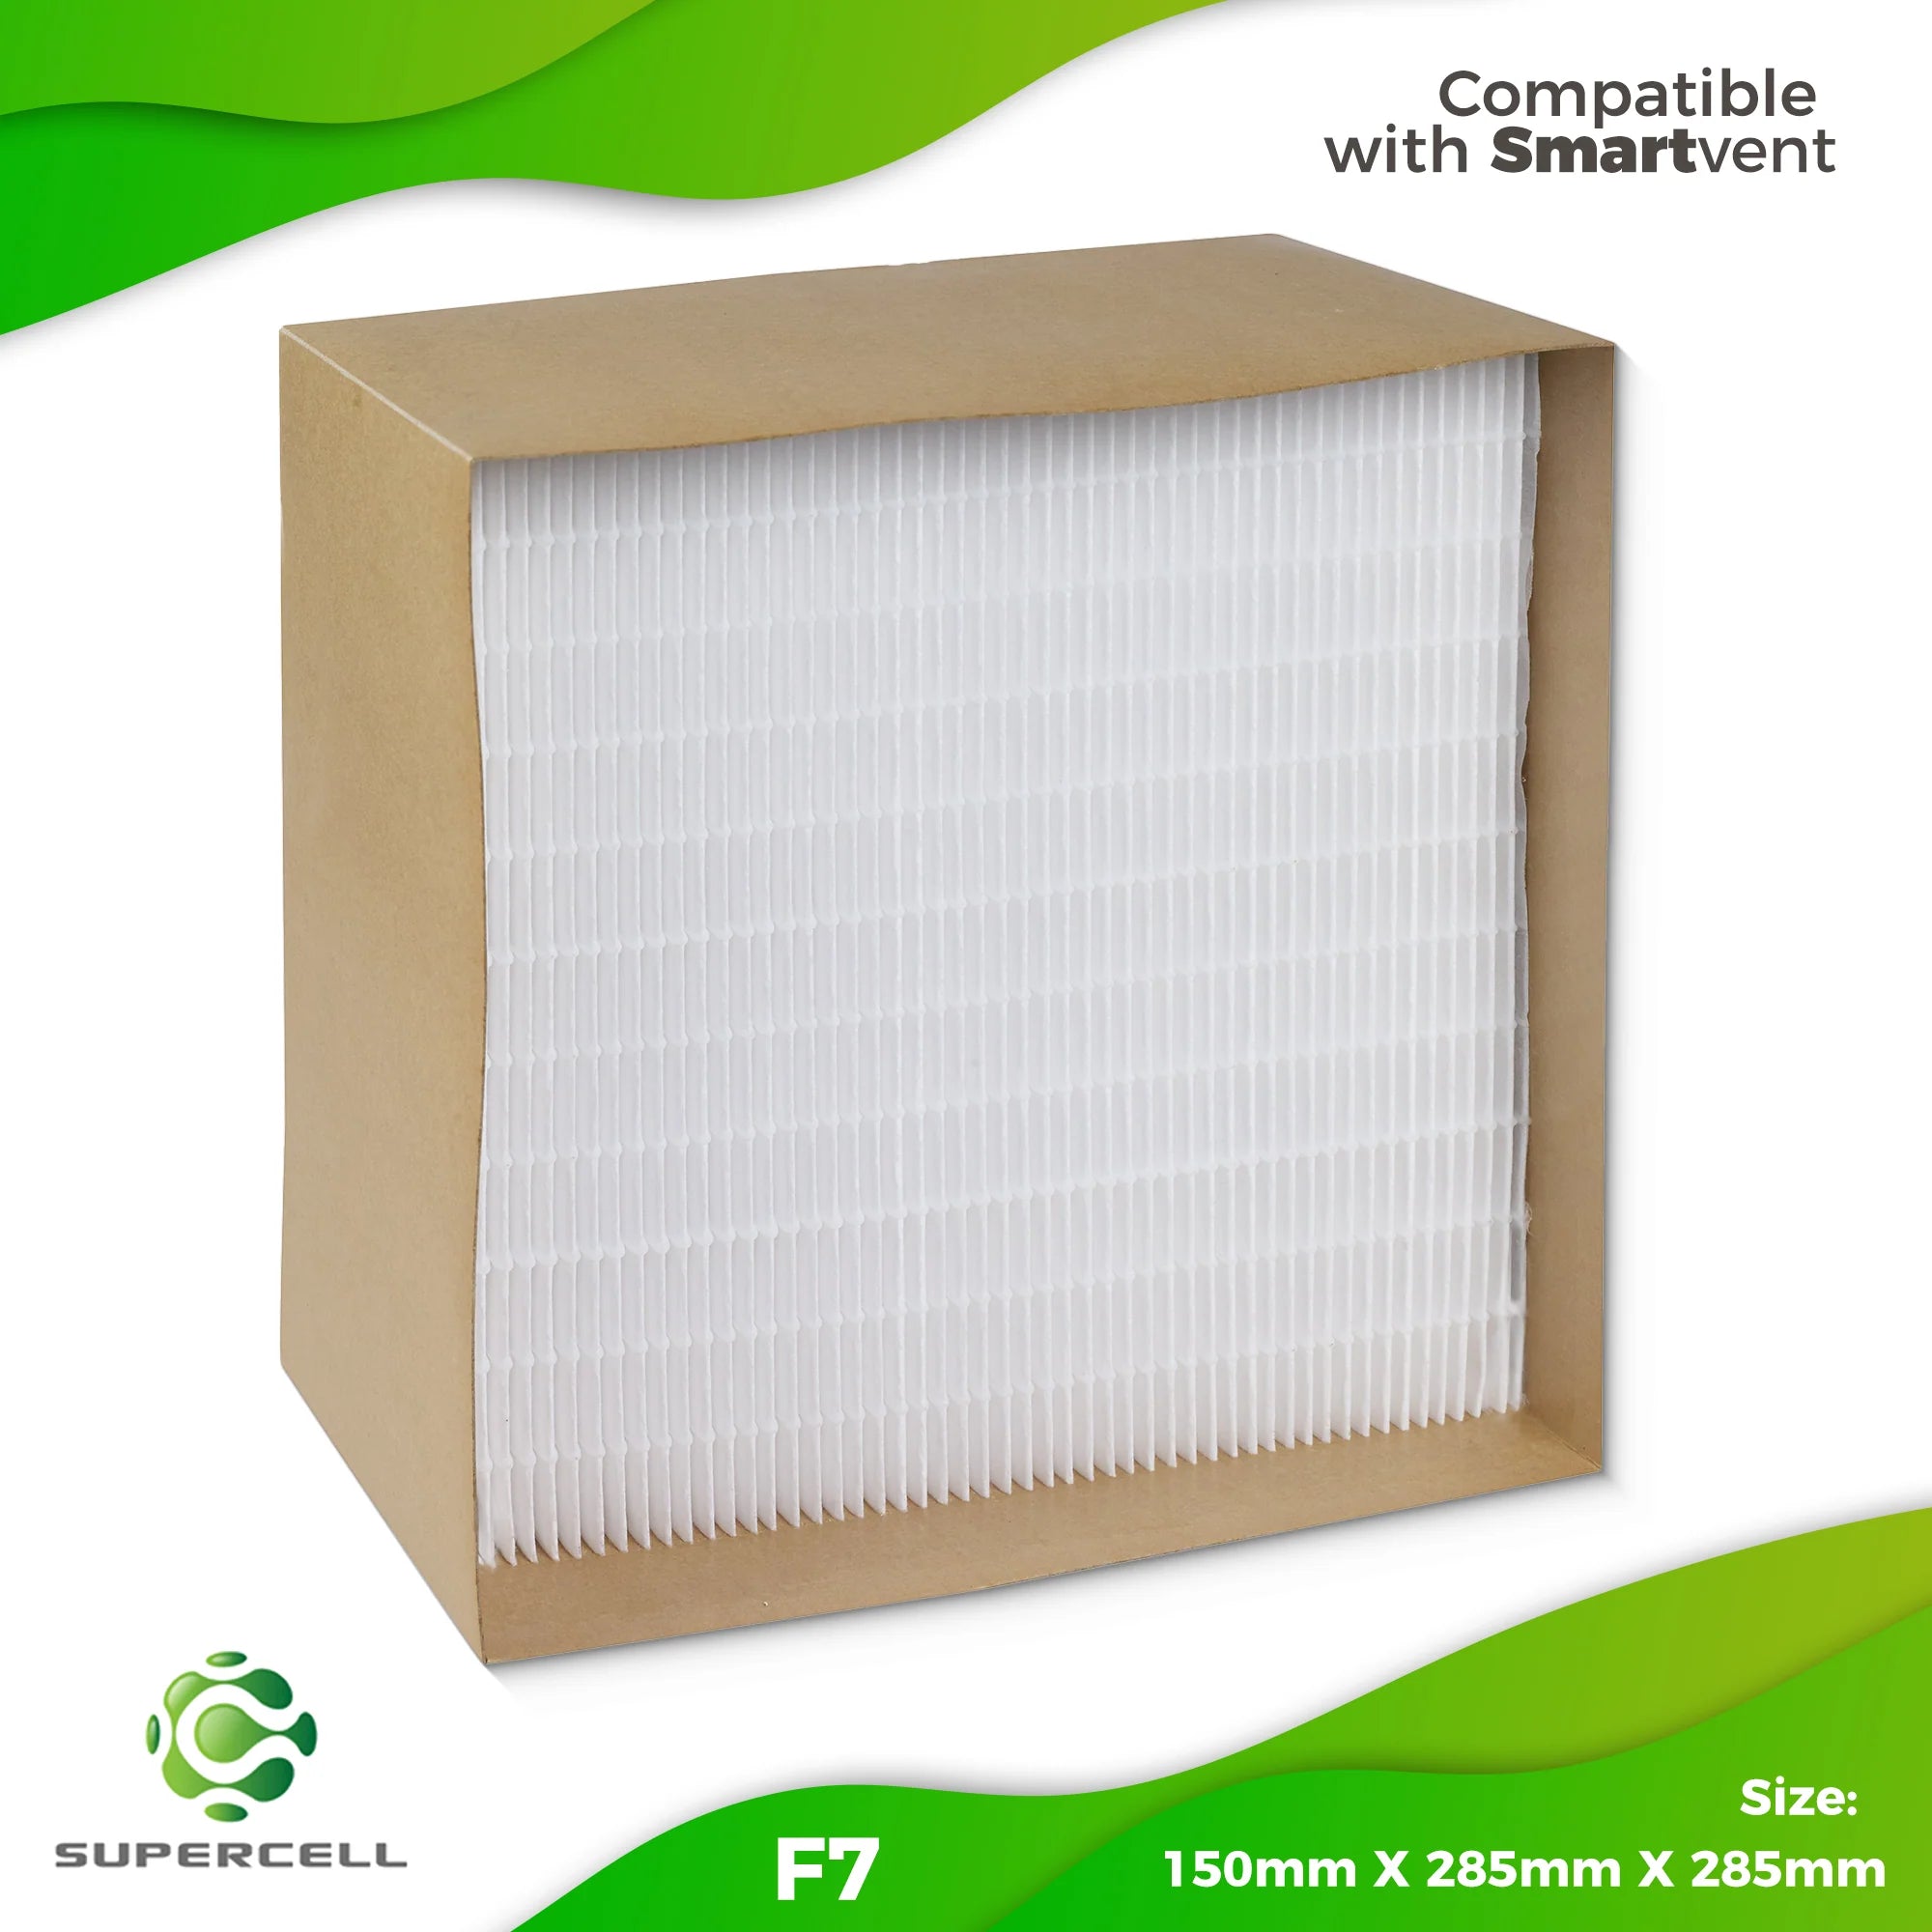 smartvent filters $60 don't pay $110